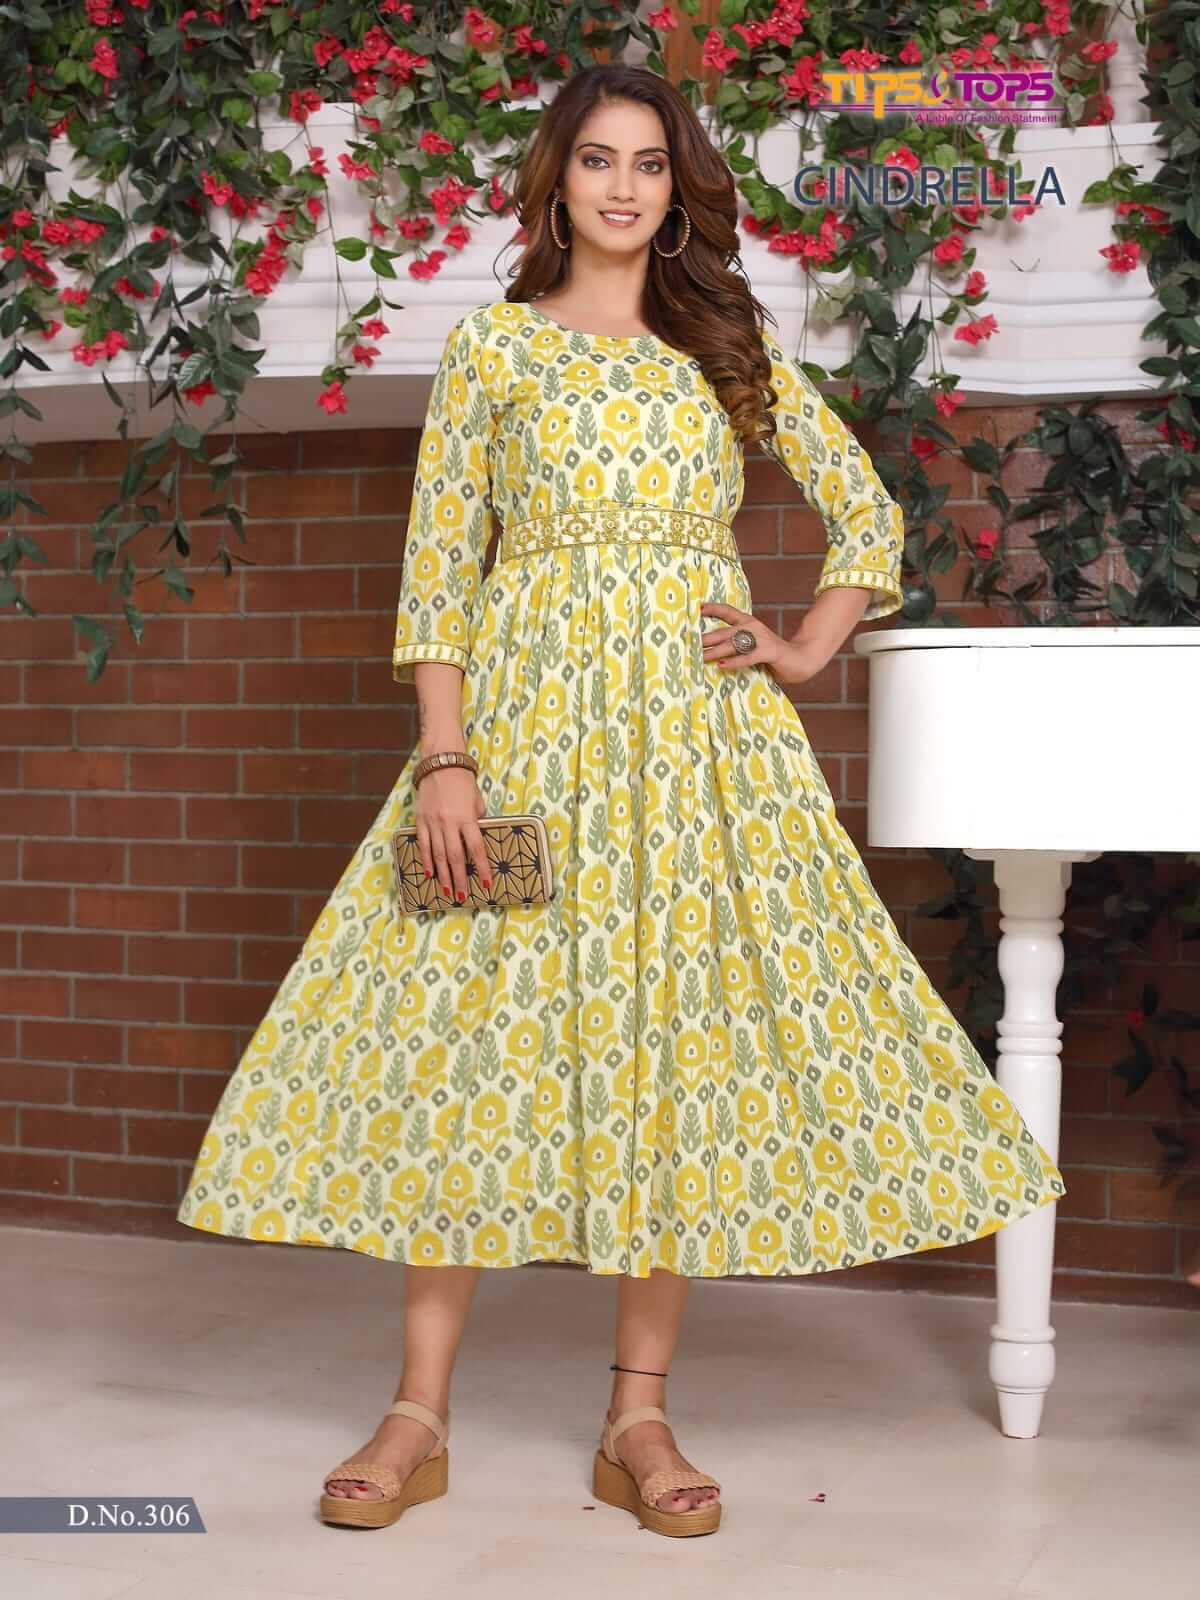 Tips And Tops Cindrella Vol 3 One Piece Dress Catalog collection 1